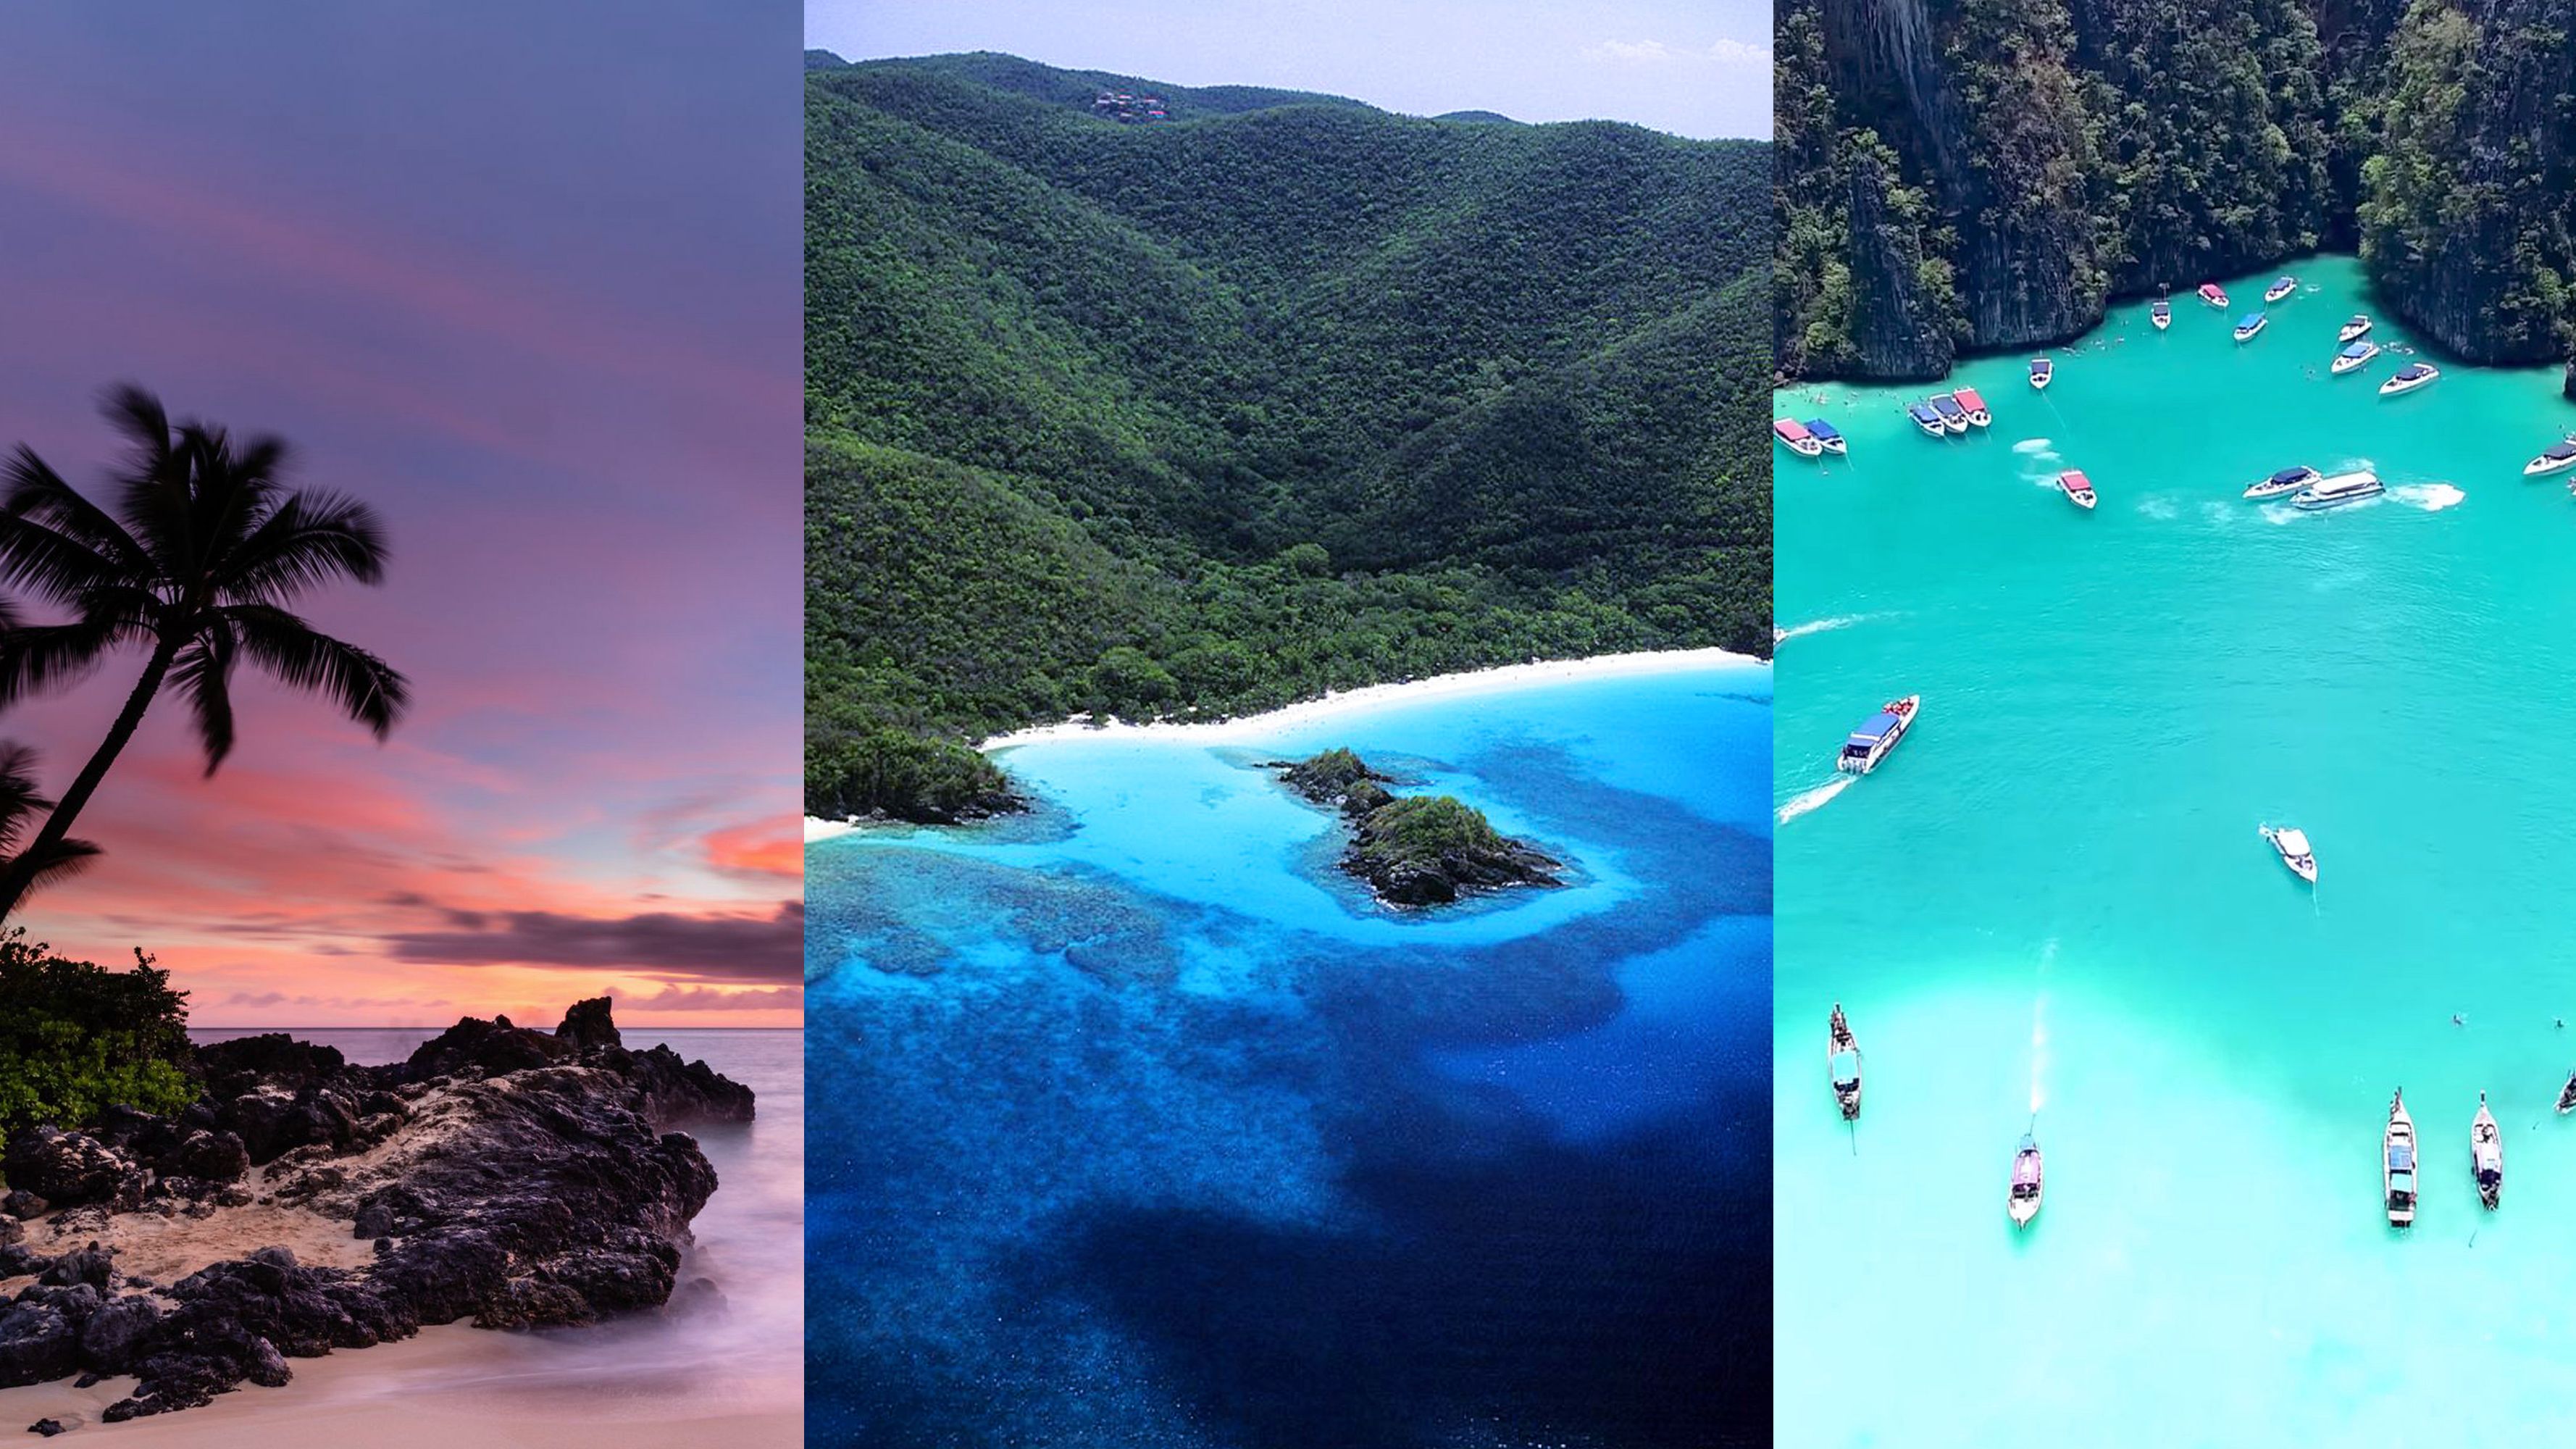 most beautiful tropical beaches in the world